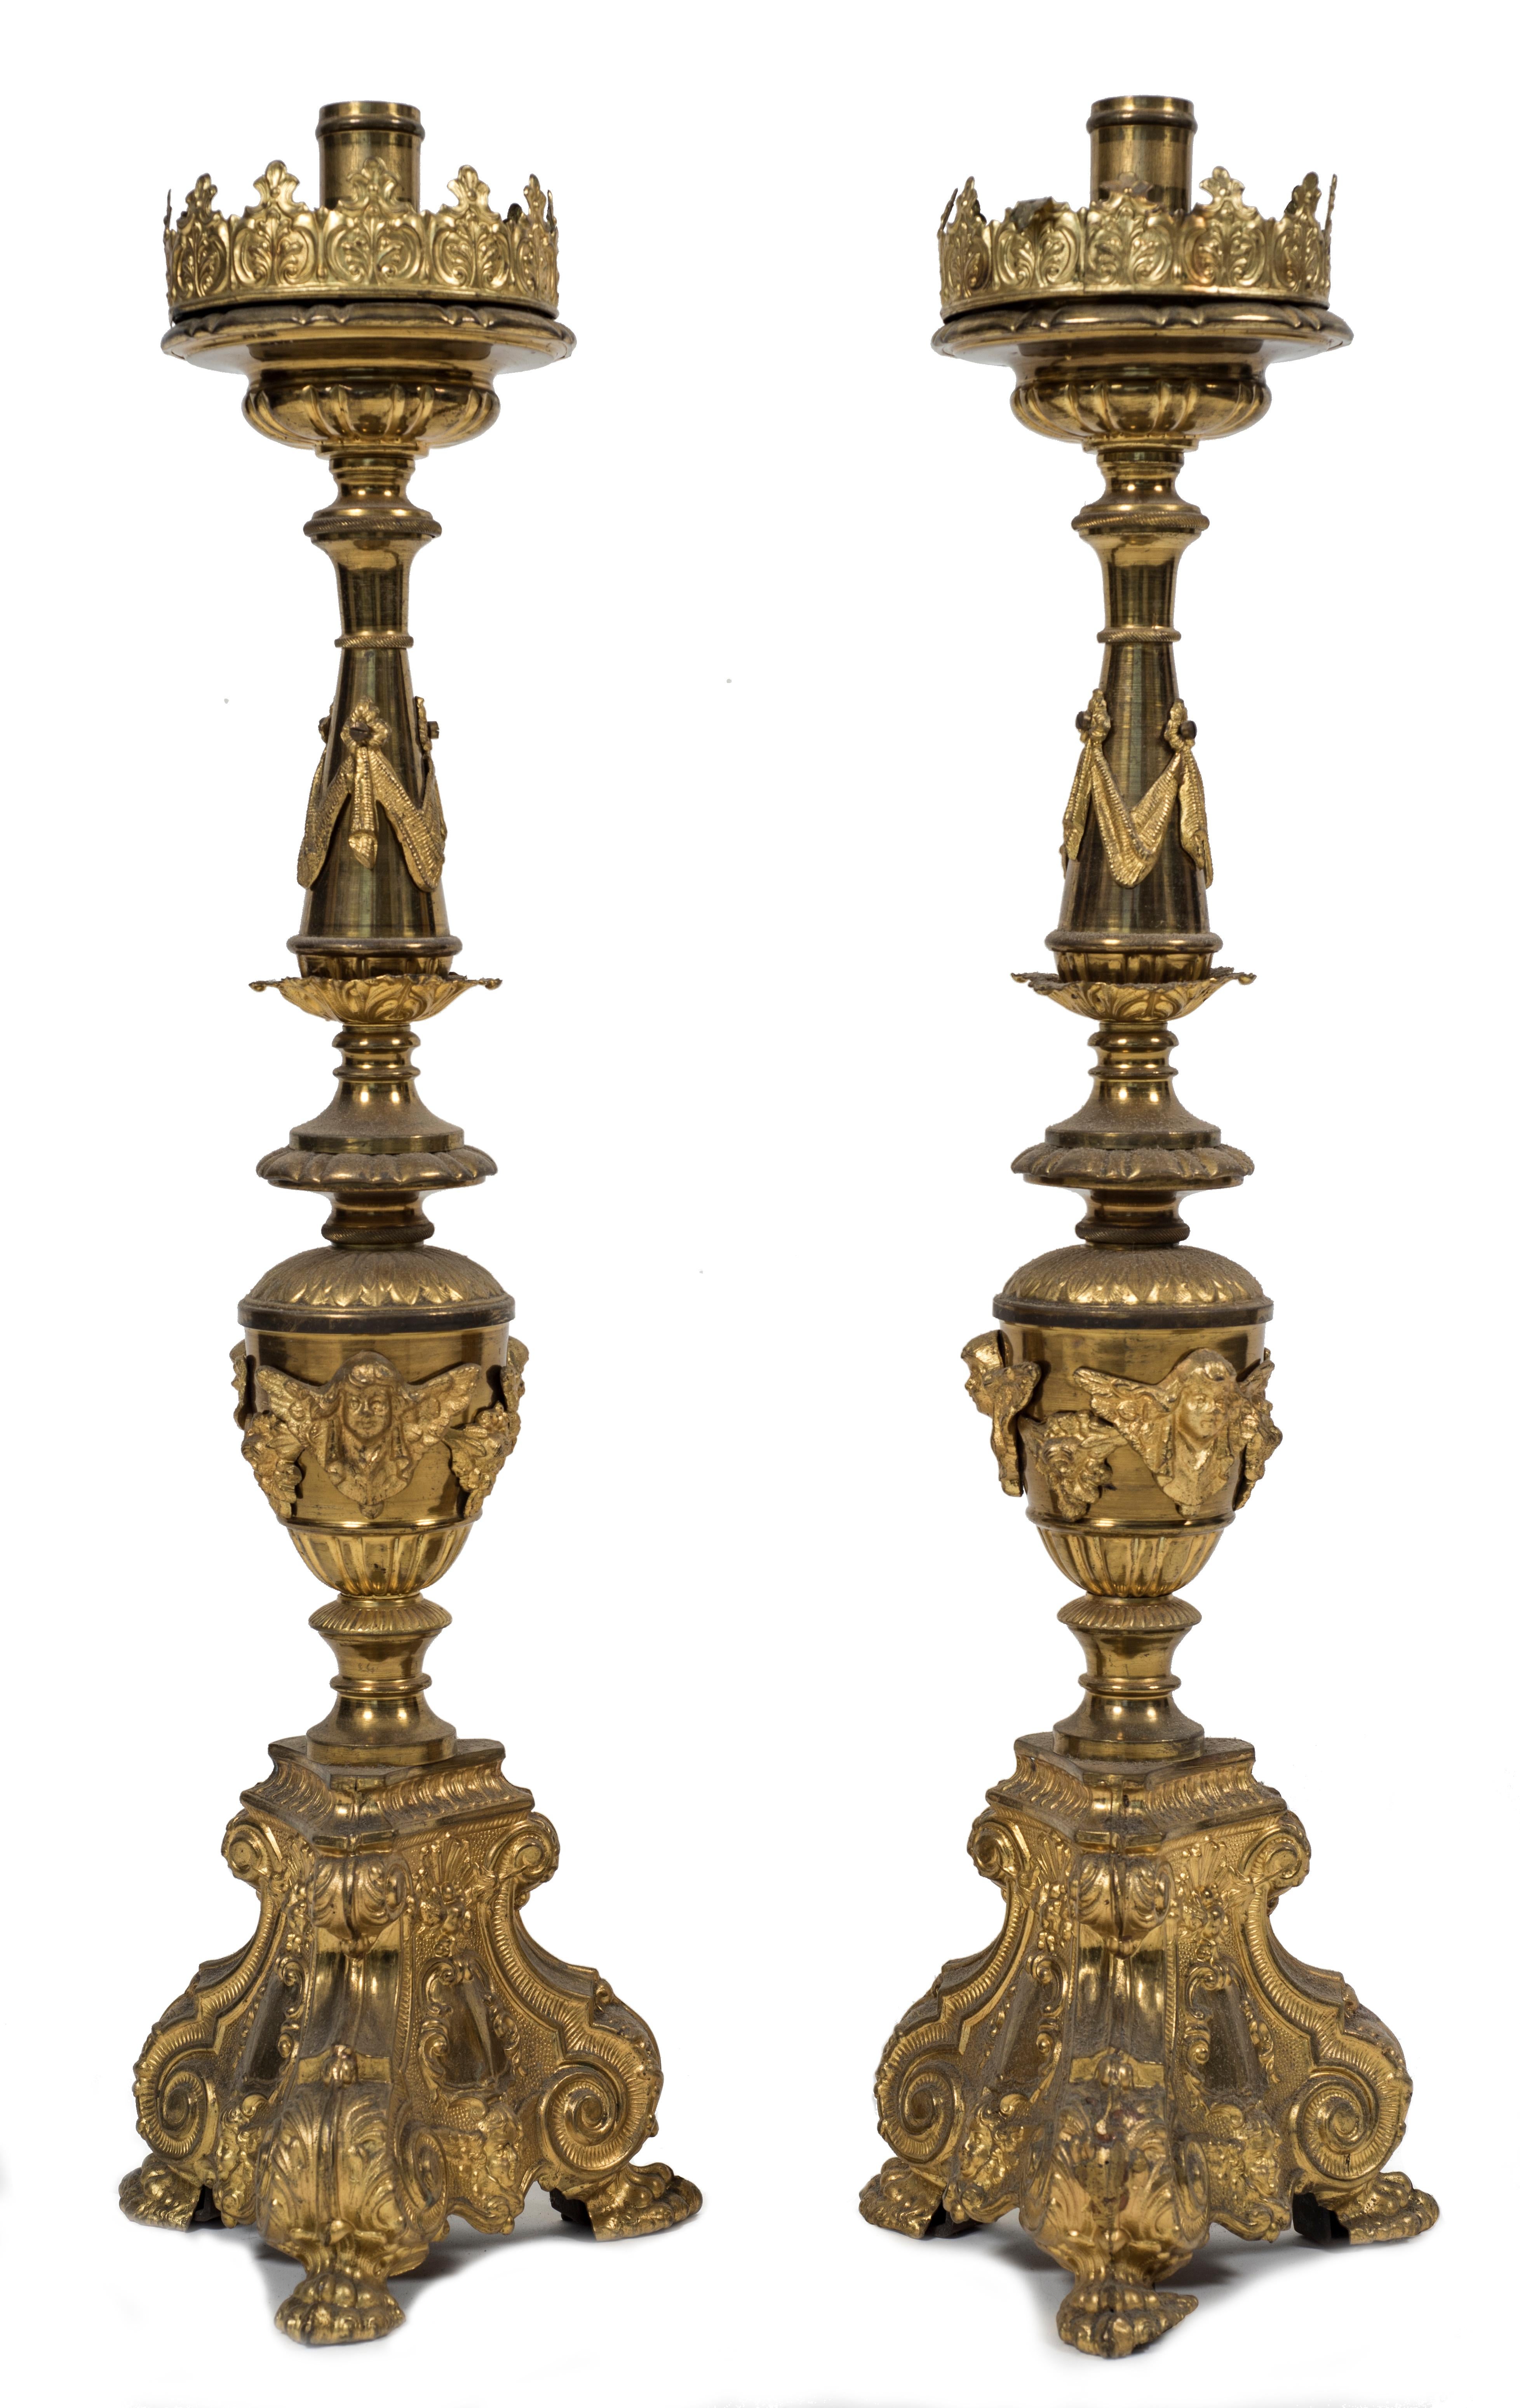 Baroque Revival Antique Pair of Candlesticks, Italy, 18th Century